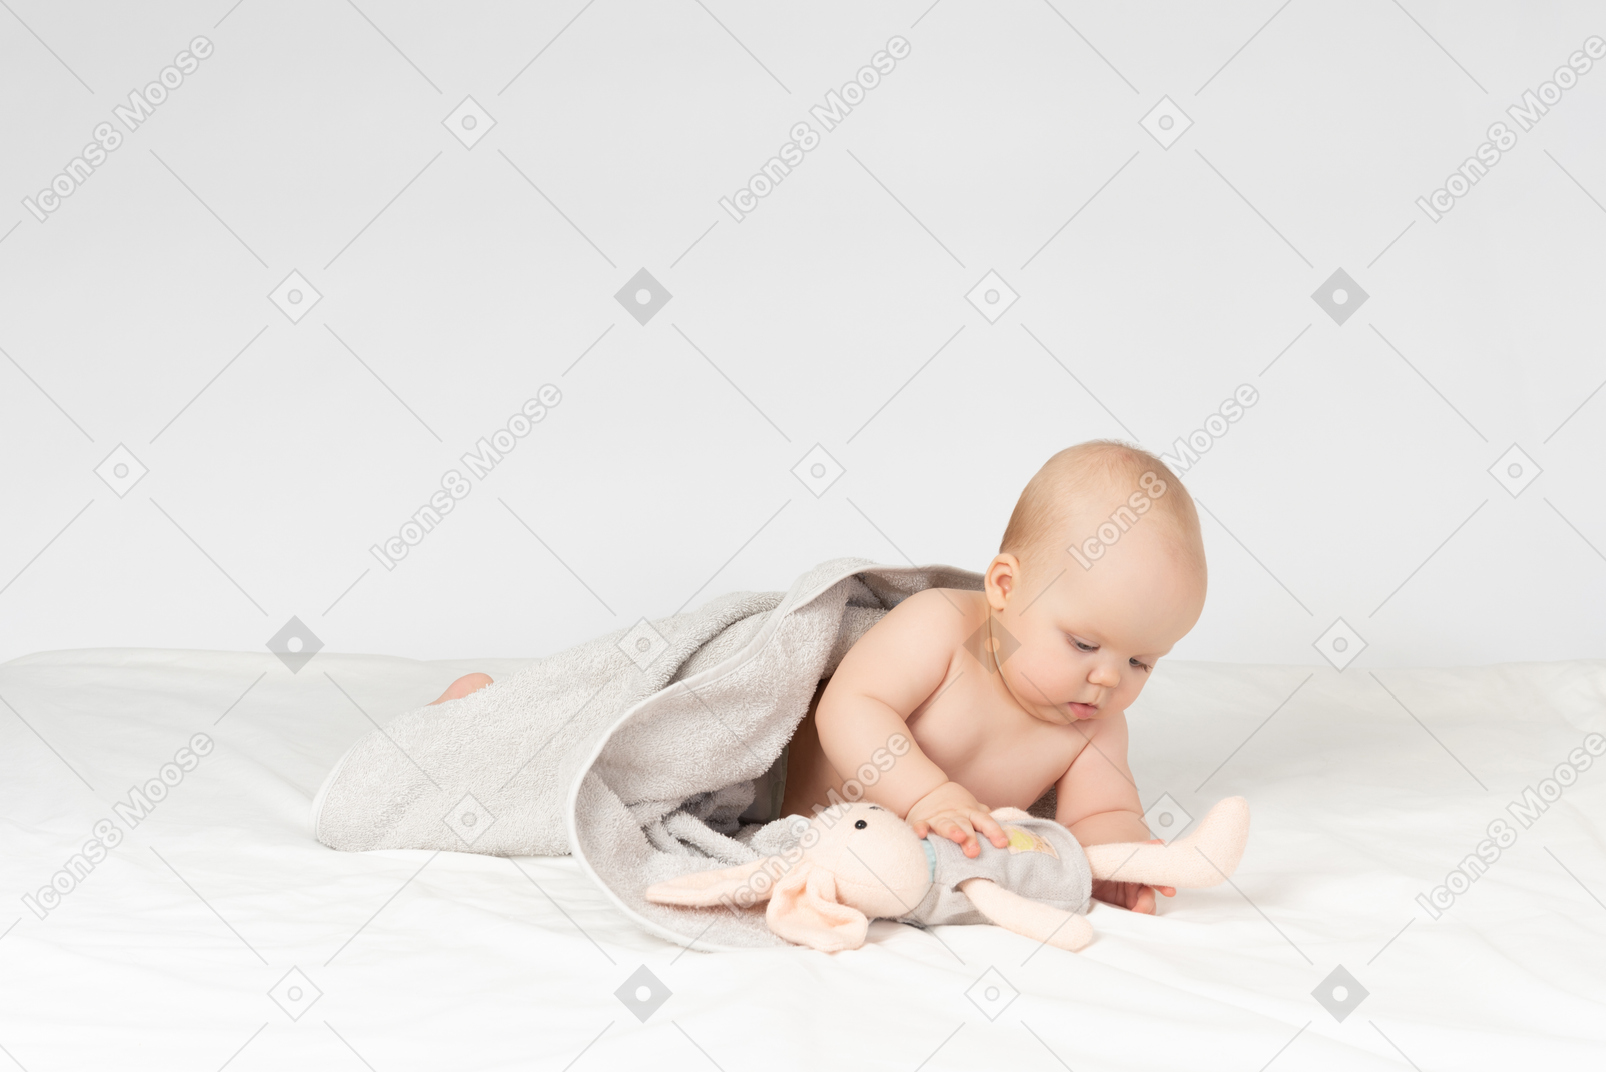 Baby girl covered in towel and playing with toy